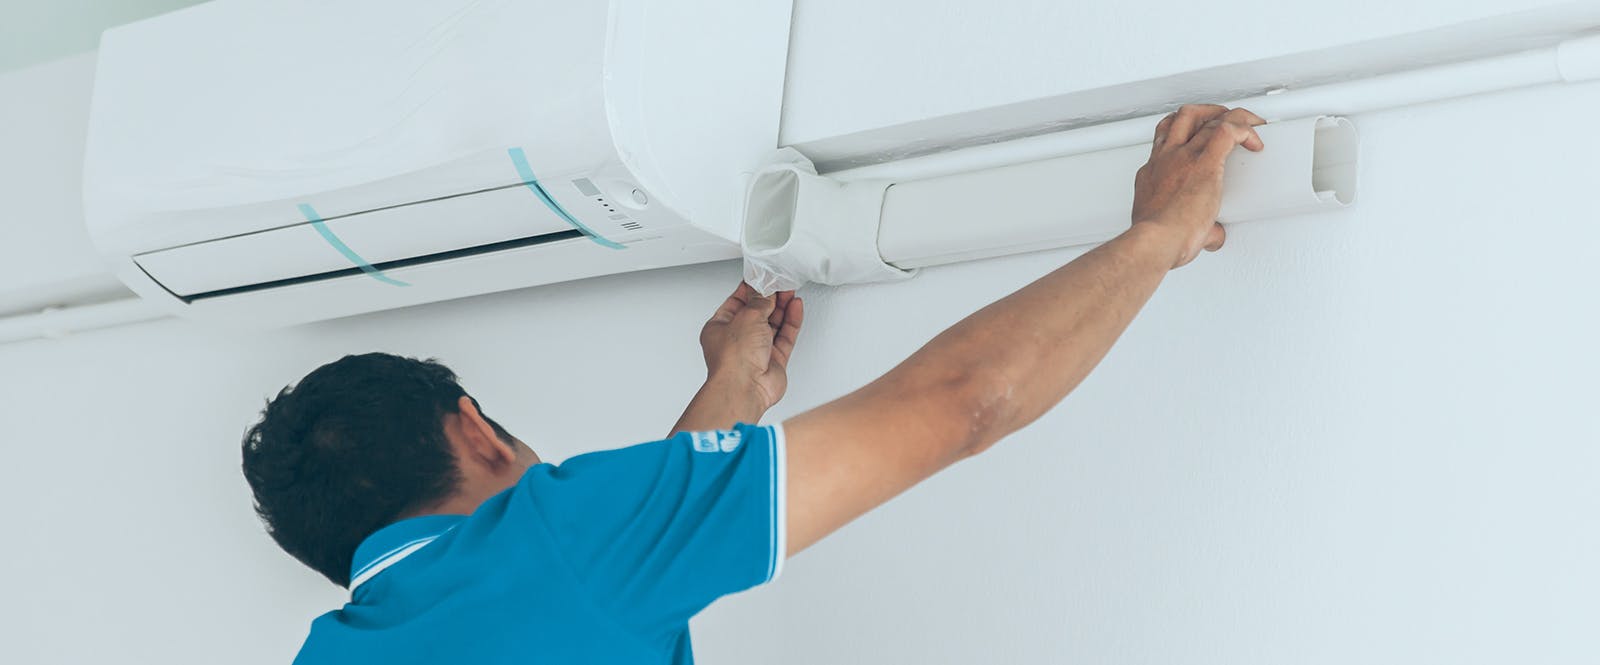 About our AC installation service